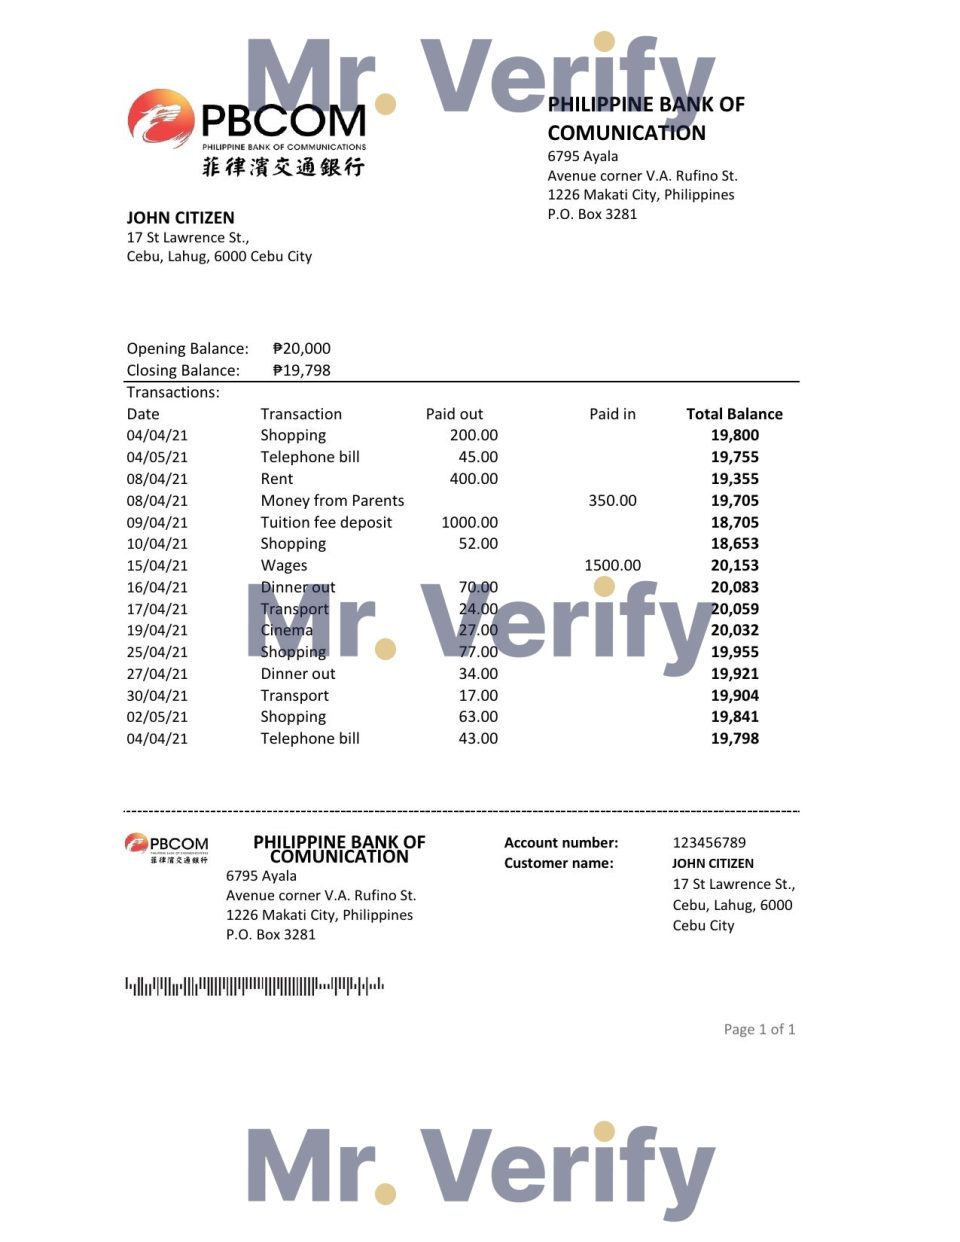 Philippines Bank of Communications bank statement easy to fill template in .xls and .pdf file format